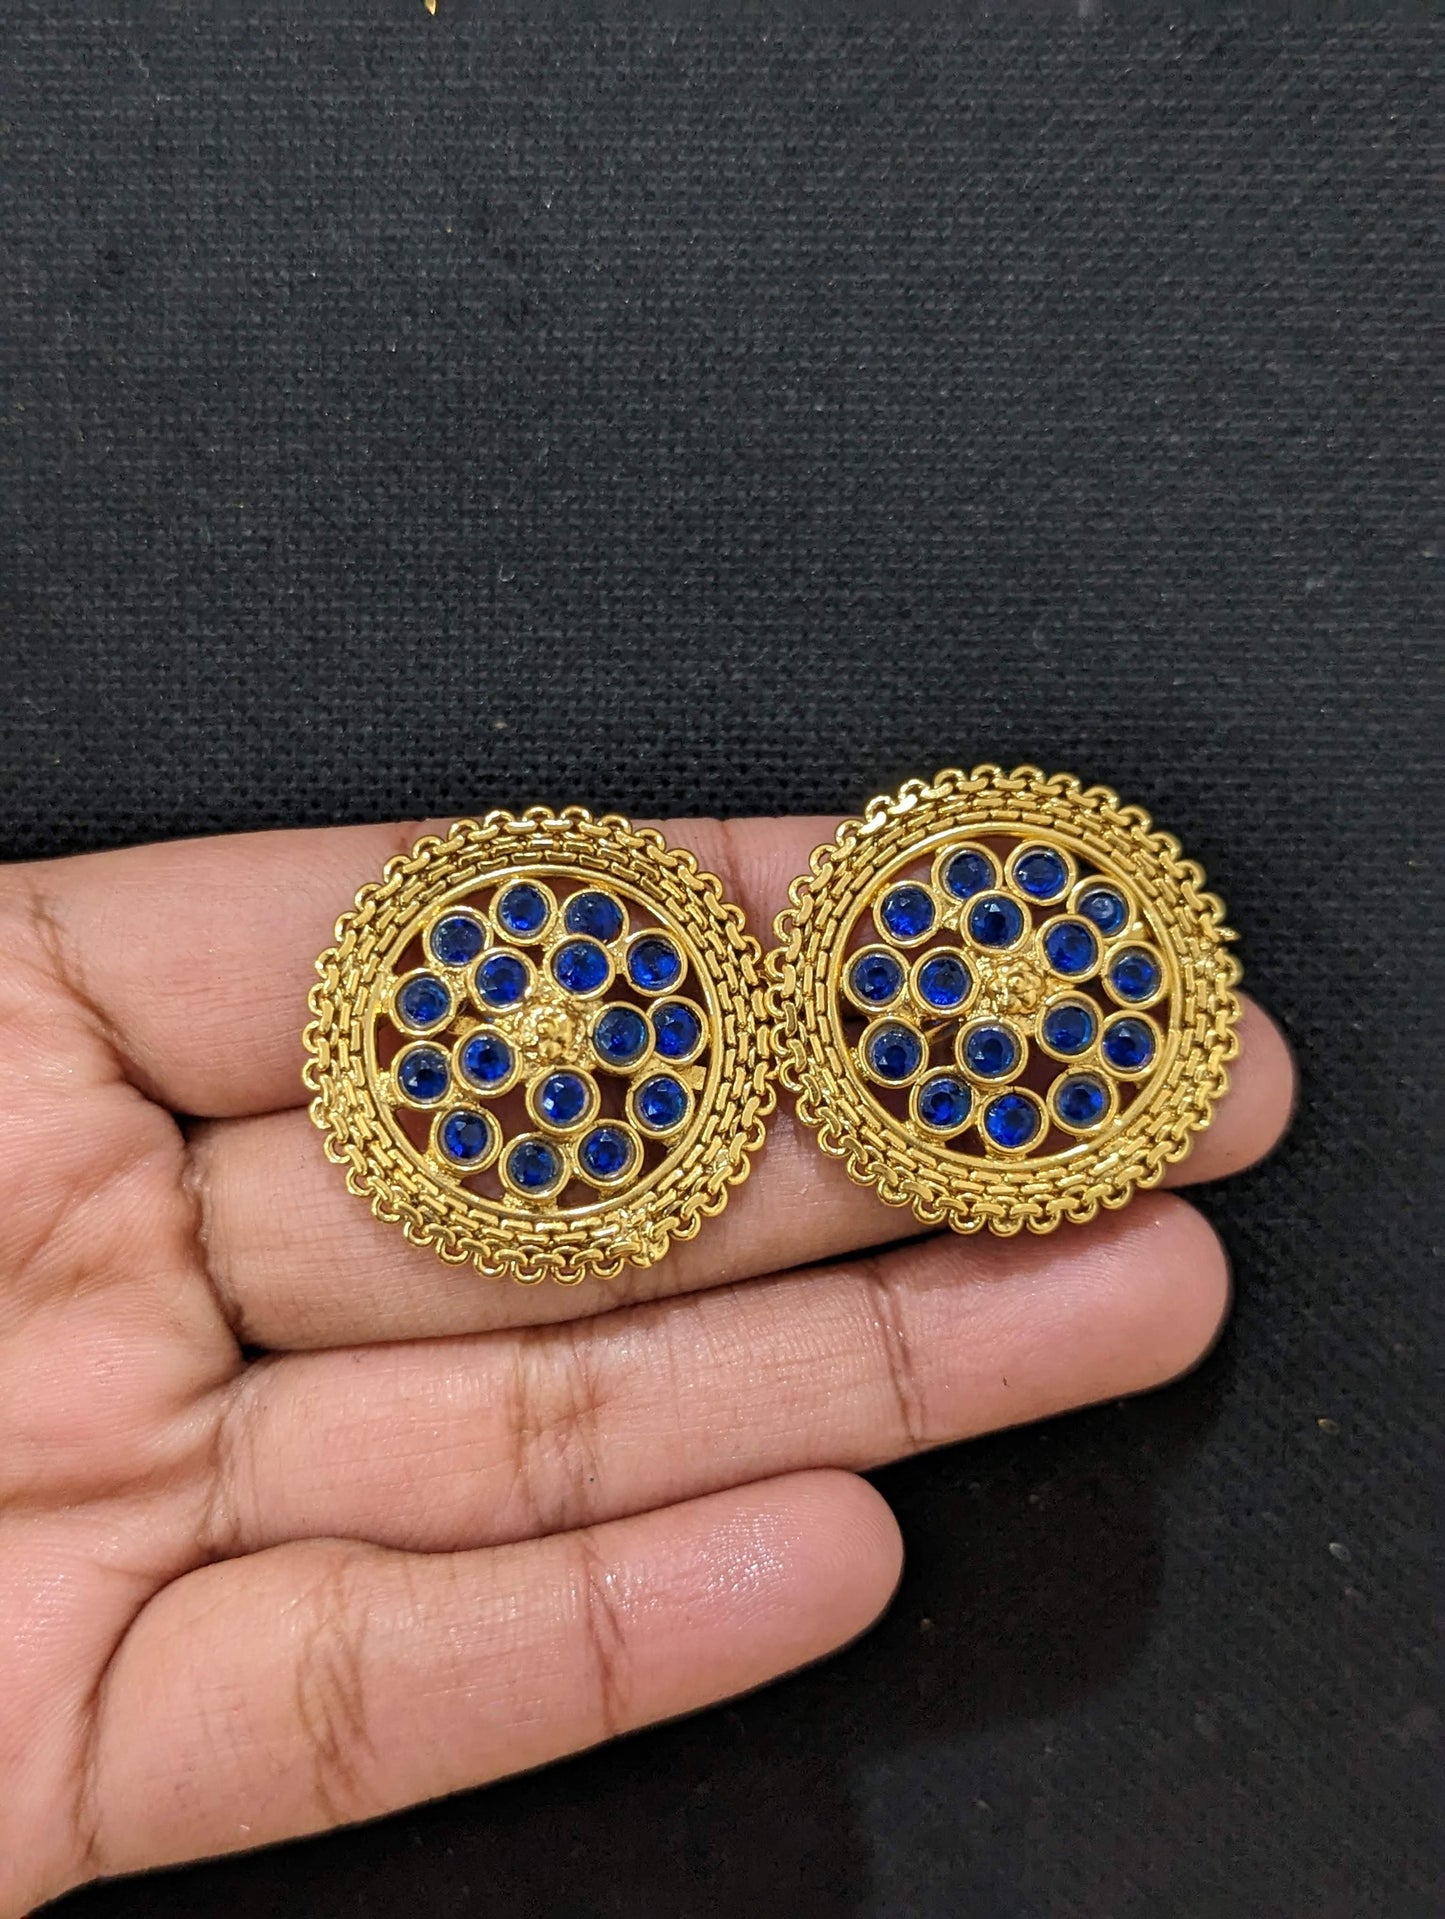 Gold plated Polki stone Round stud Earrings